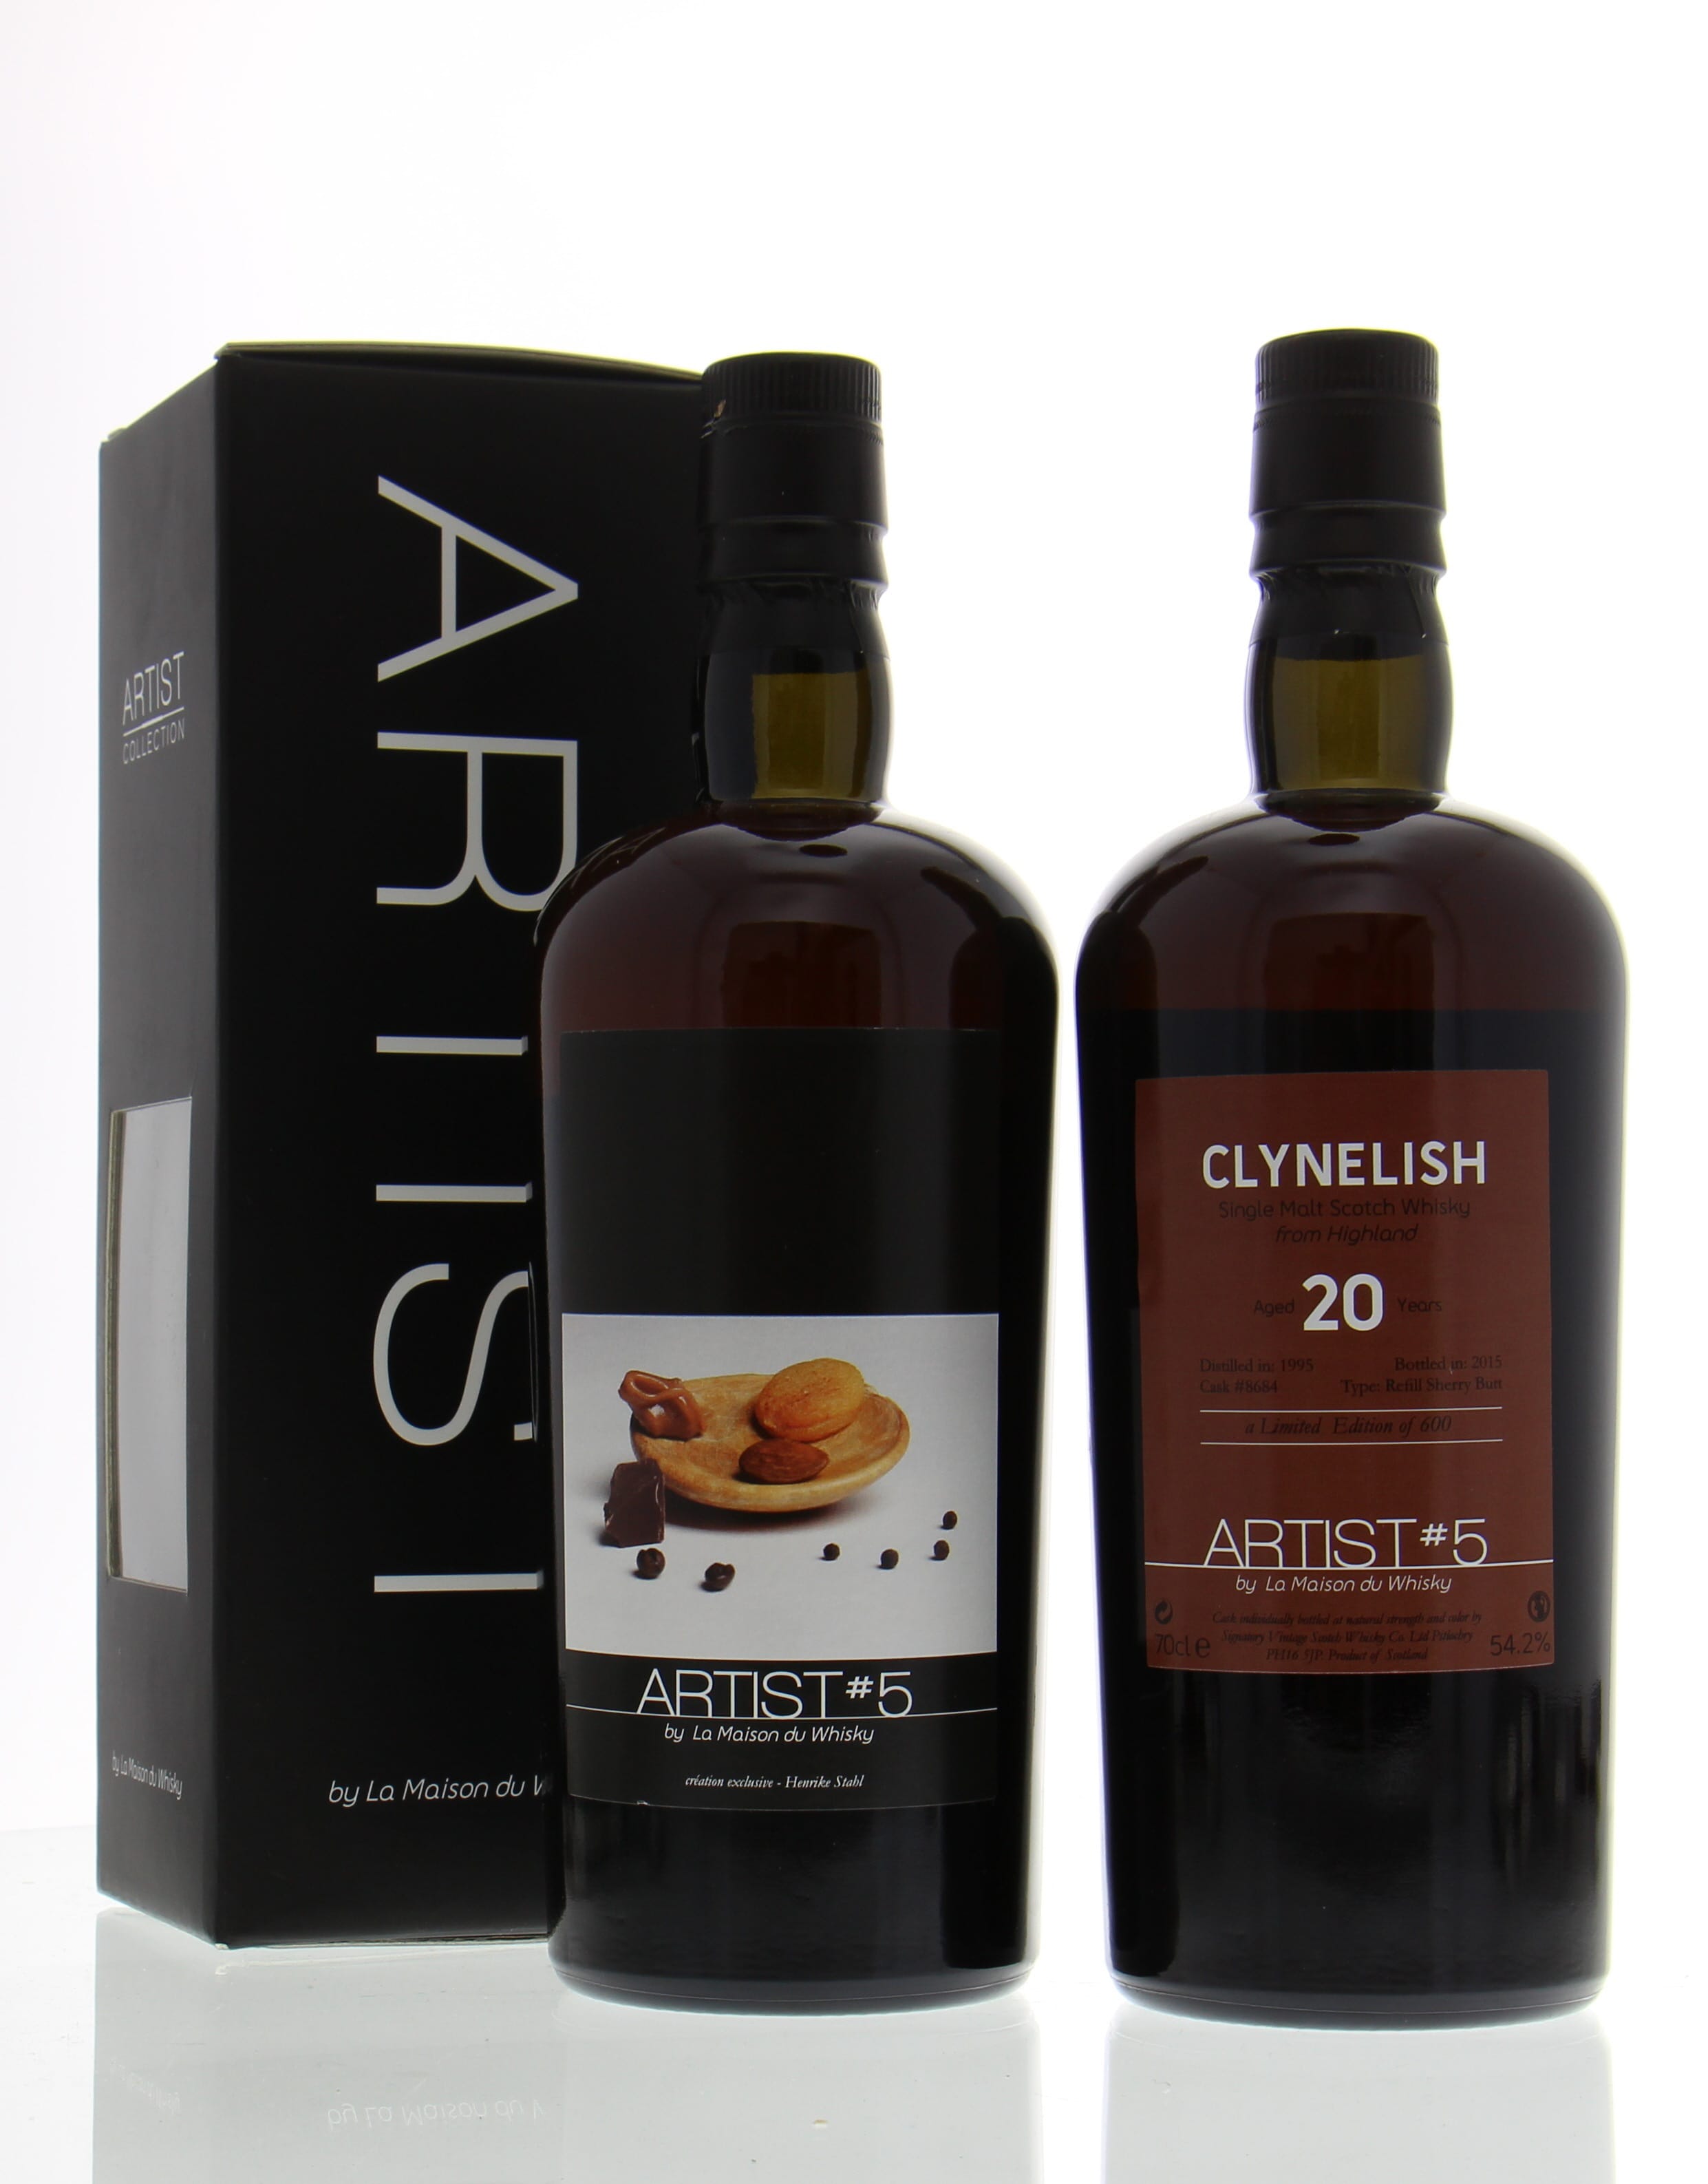 Clynelish - 20 Years Old Artist #5 Cask:8684 54.2% 1995 In Original Container